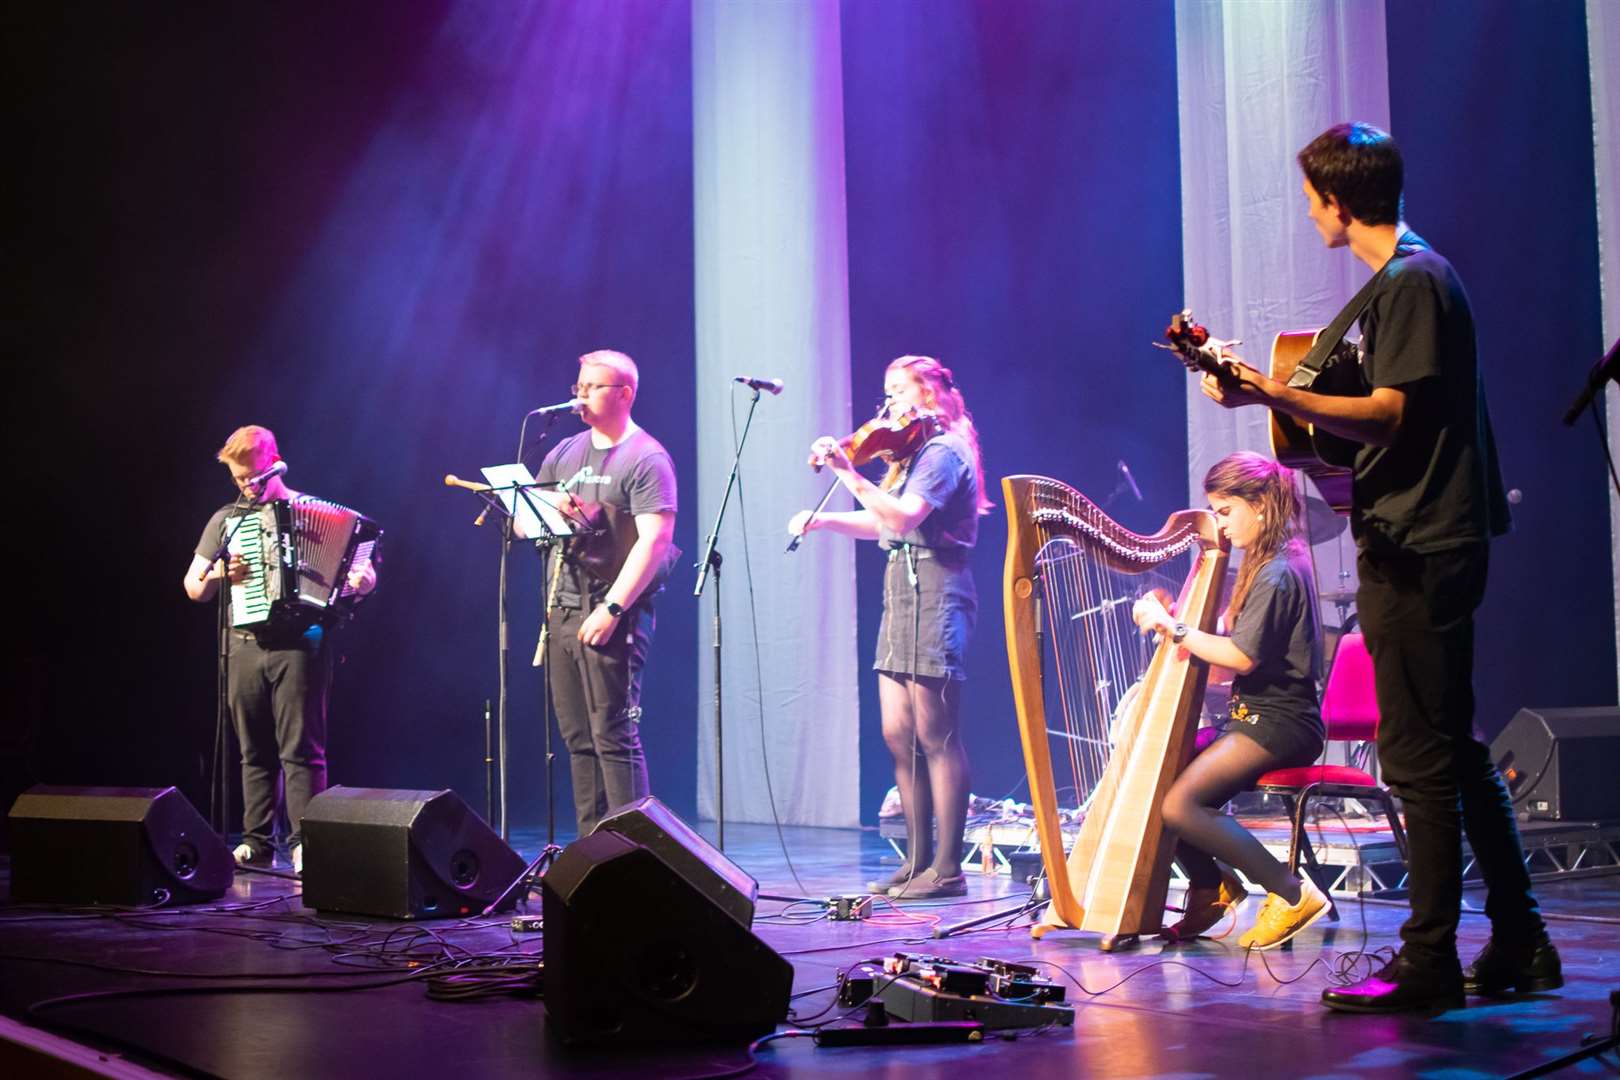 Last live appearances from the Ceilidh Trail musicians were back in 2019.